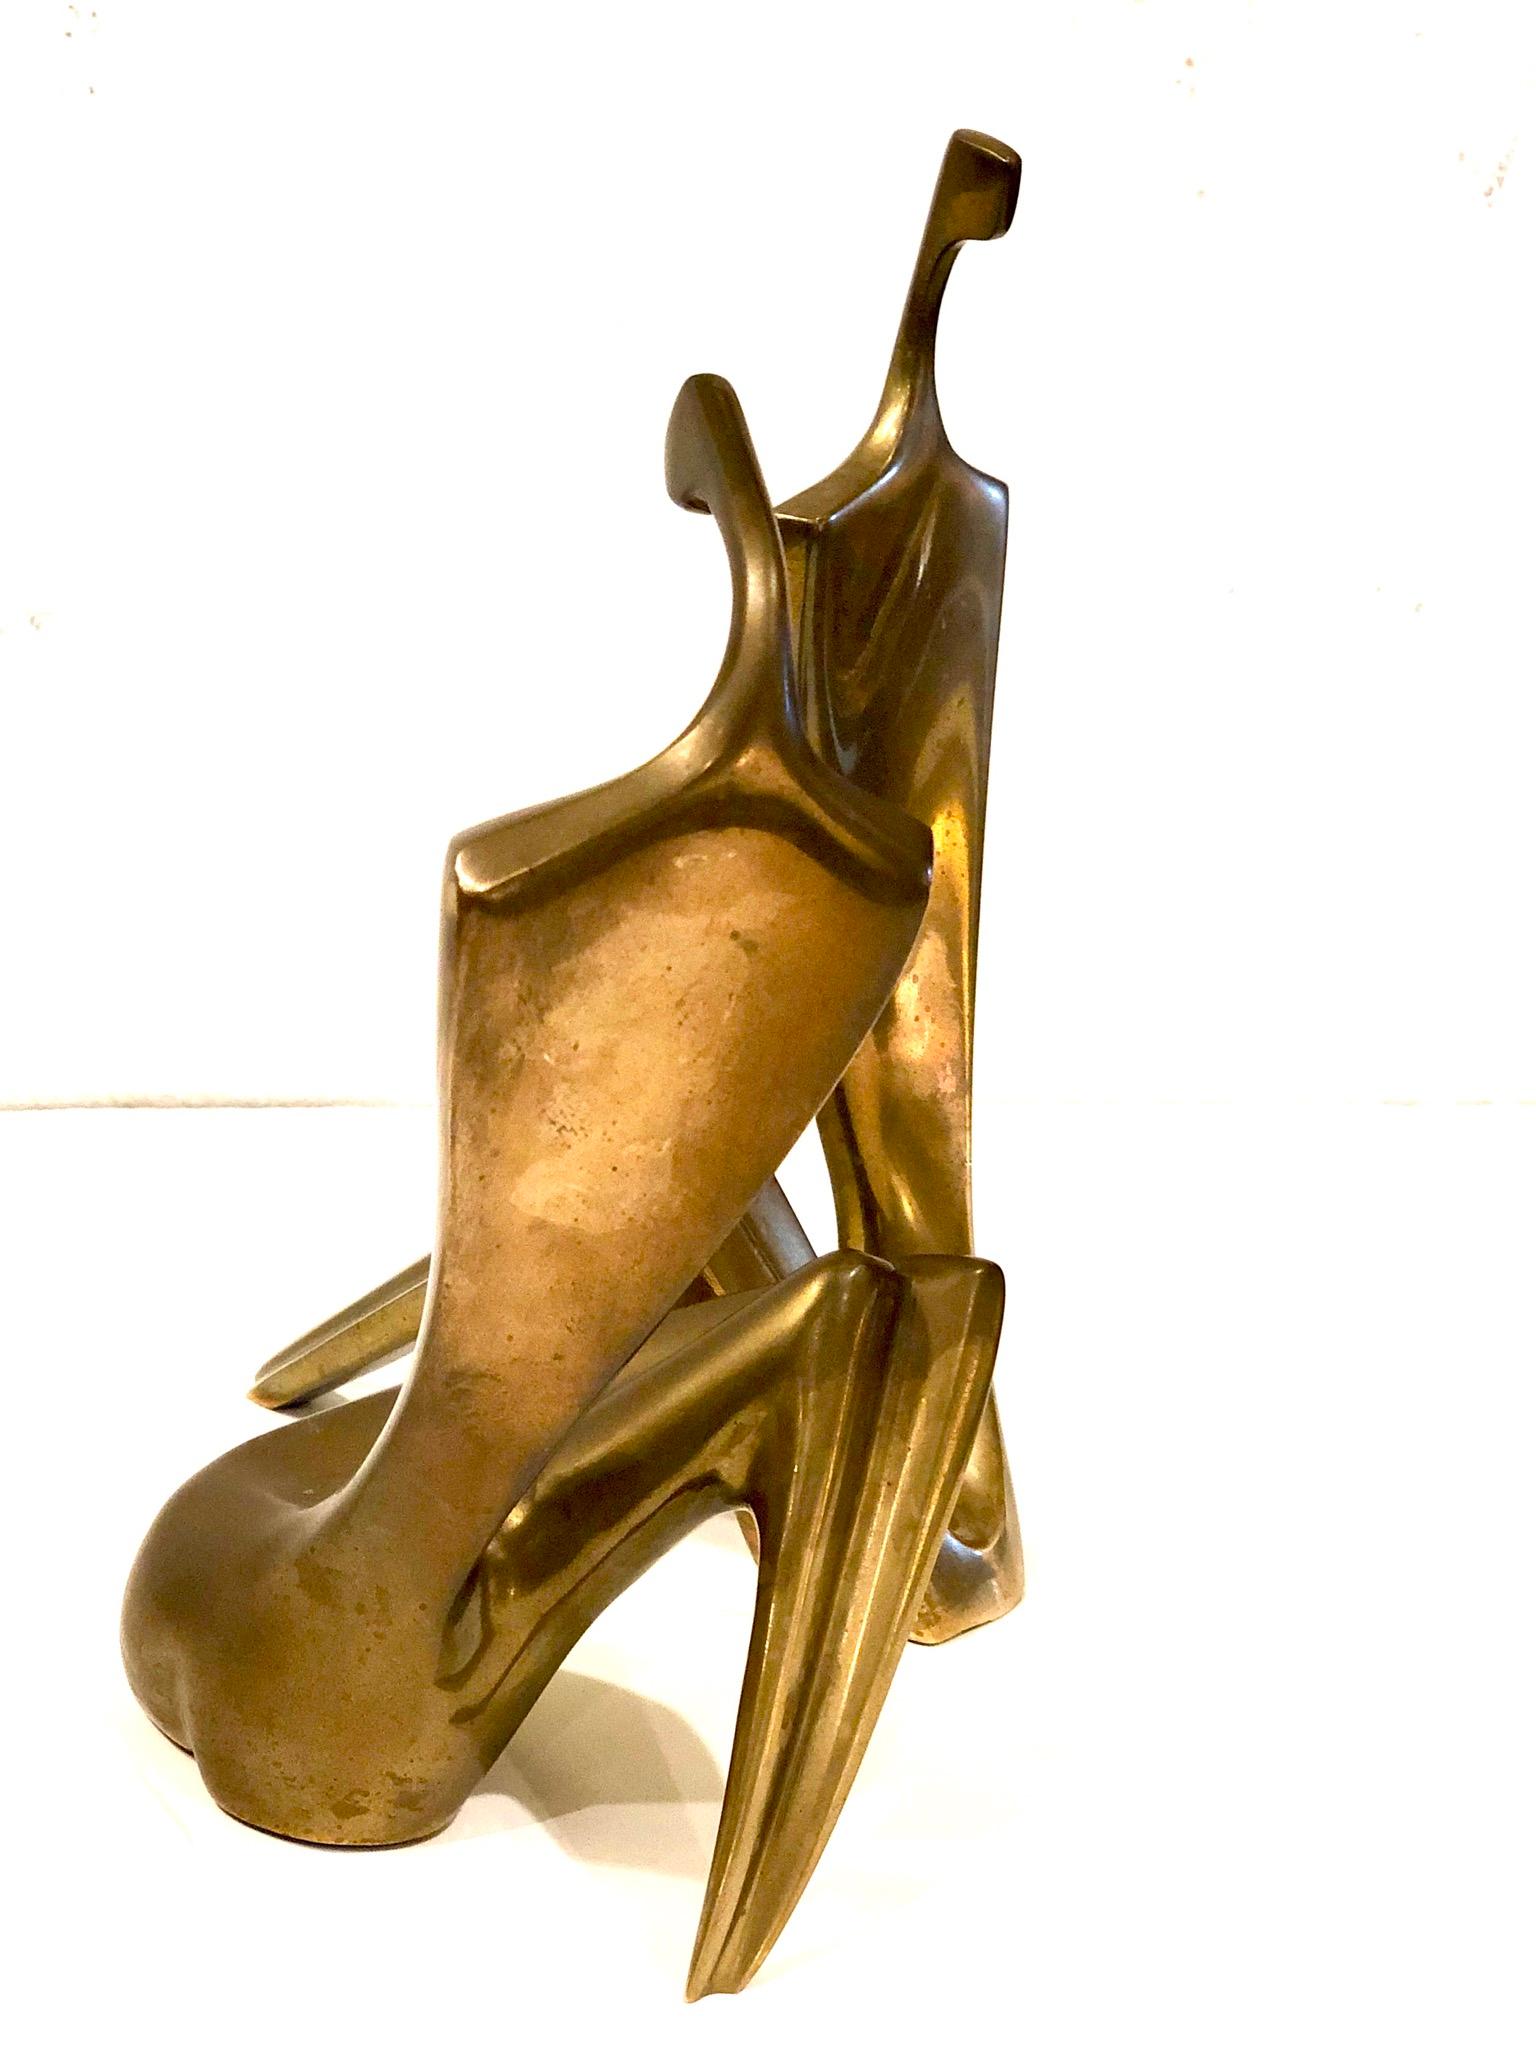 Signed and Numbered Patinated Bronze Sculptures by Itzik Ben Shalom 1